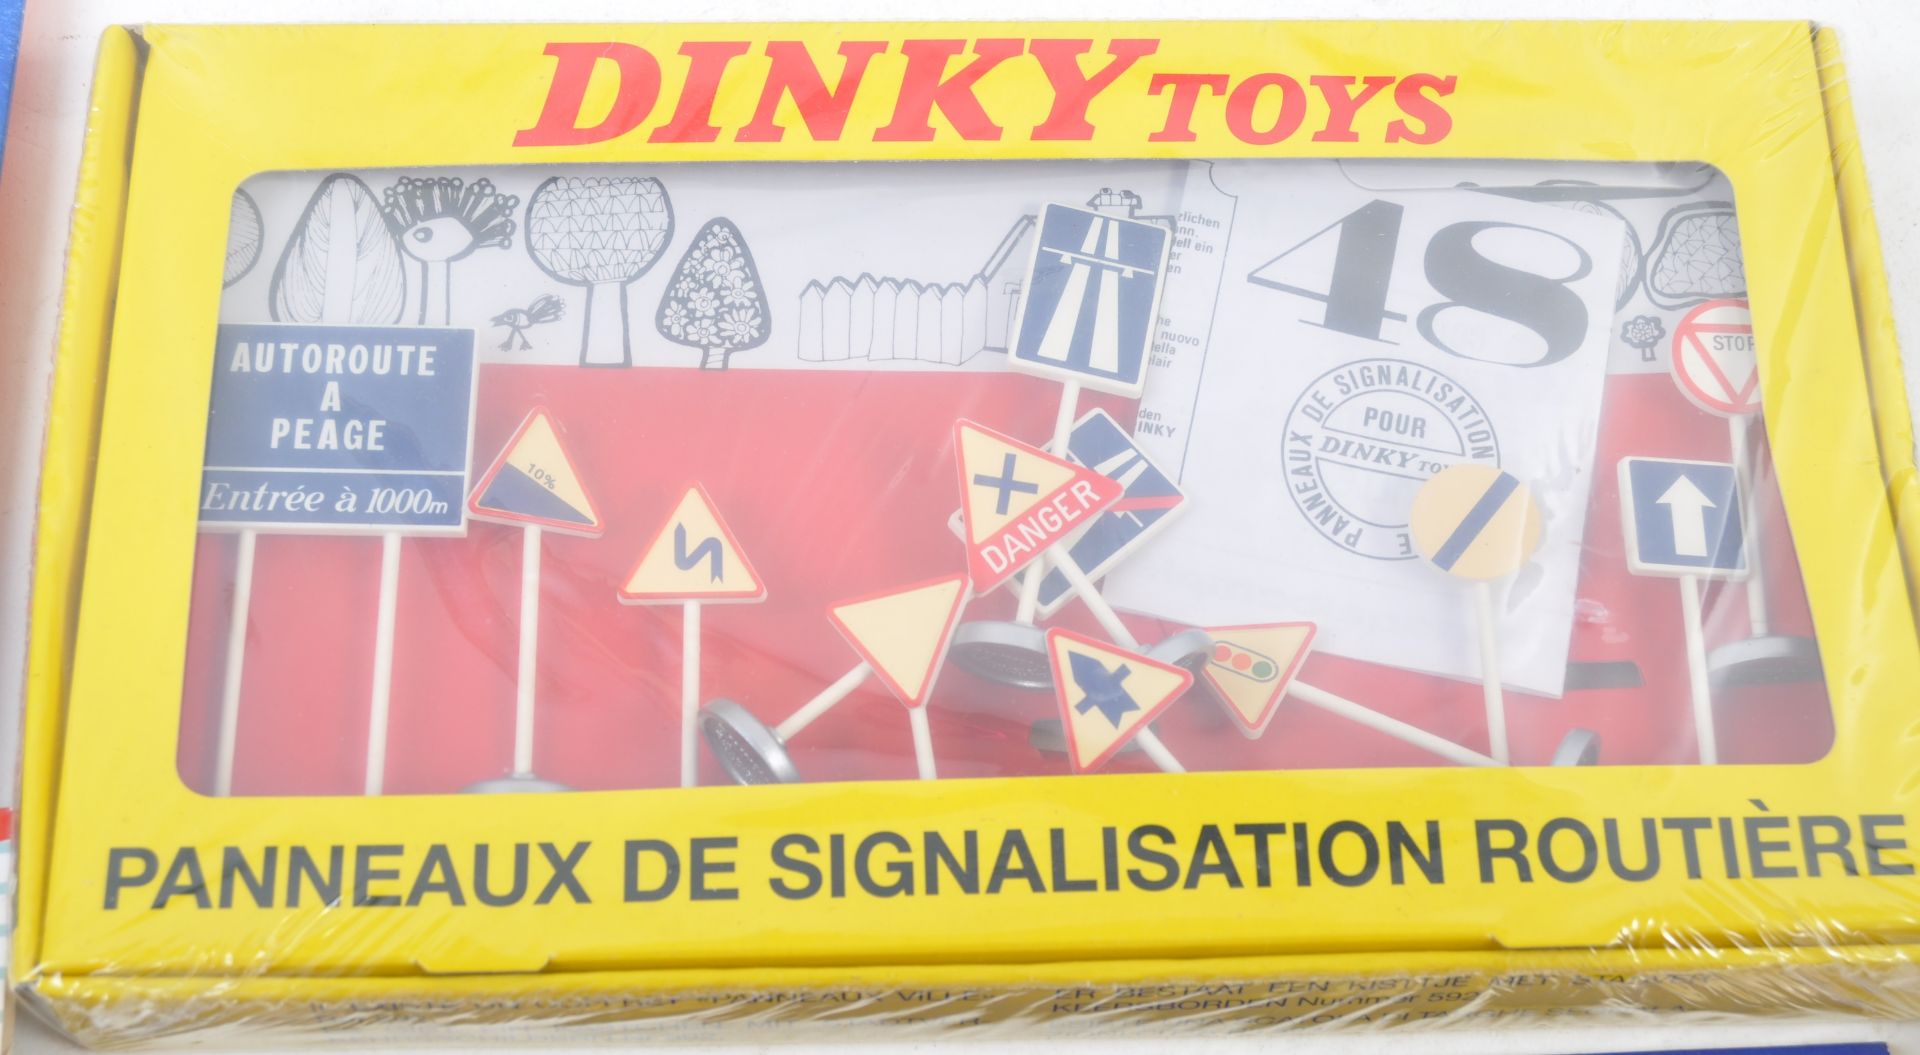 COLLECTION OF ATLAS AND DEAGOSTINI DINKY TOYS - Image 3 of 5